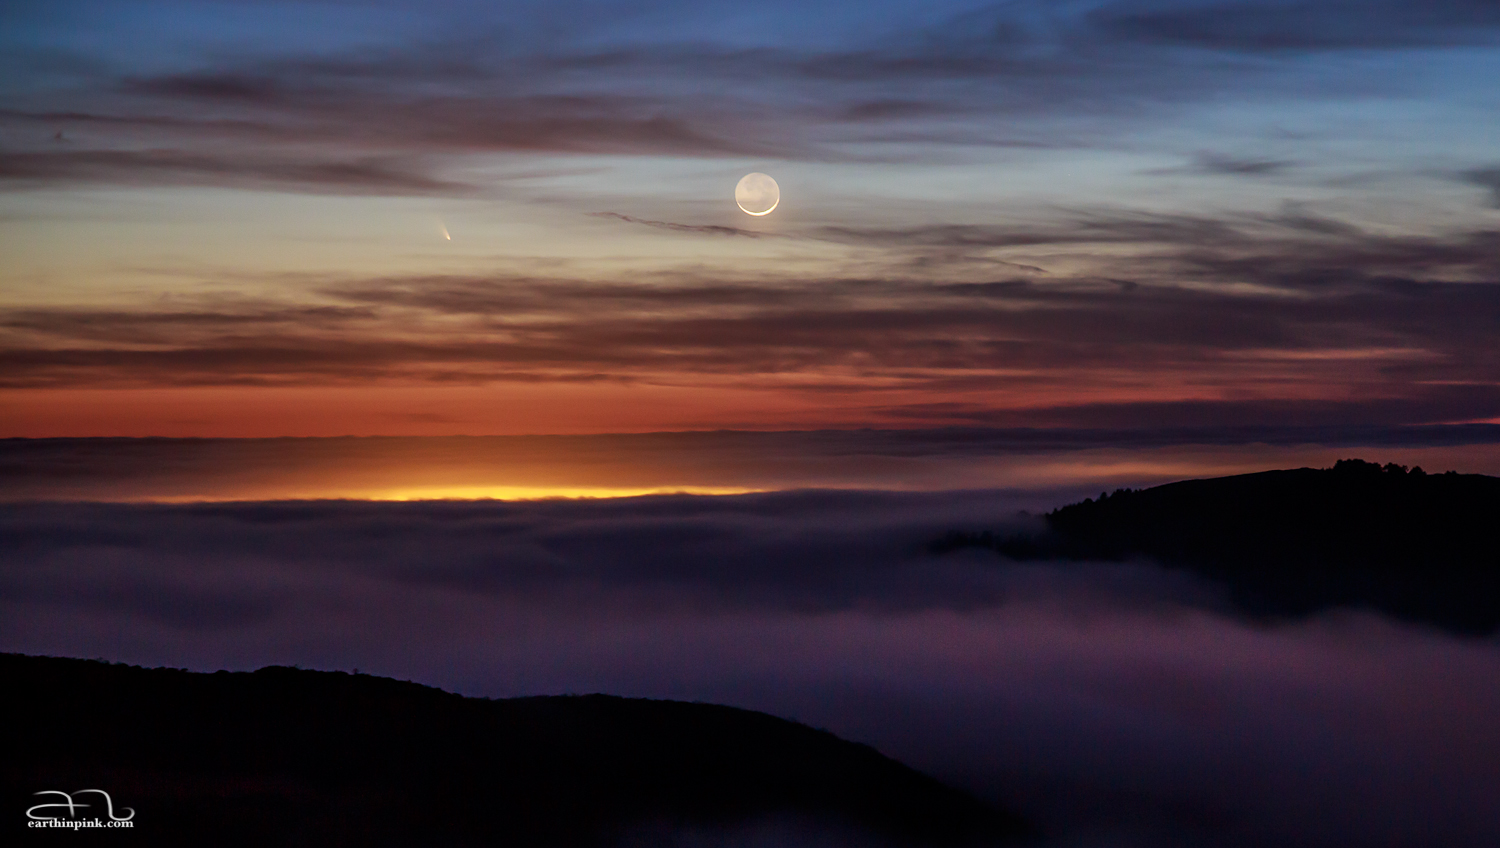 Comet PanSTARRS C/2011 L4 and a very new Moon setting over the Pacific above Half Moon Bay in March 2013